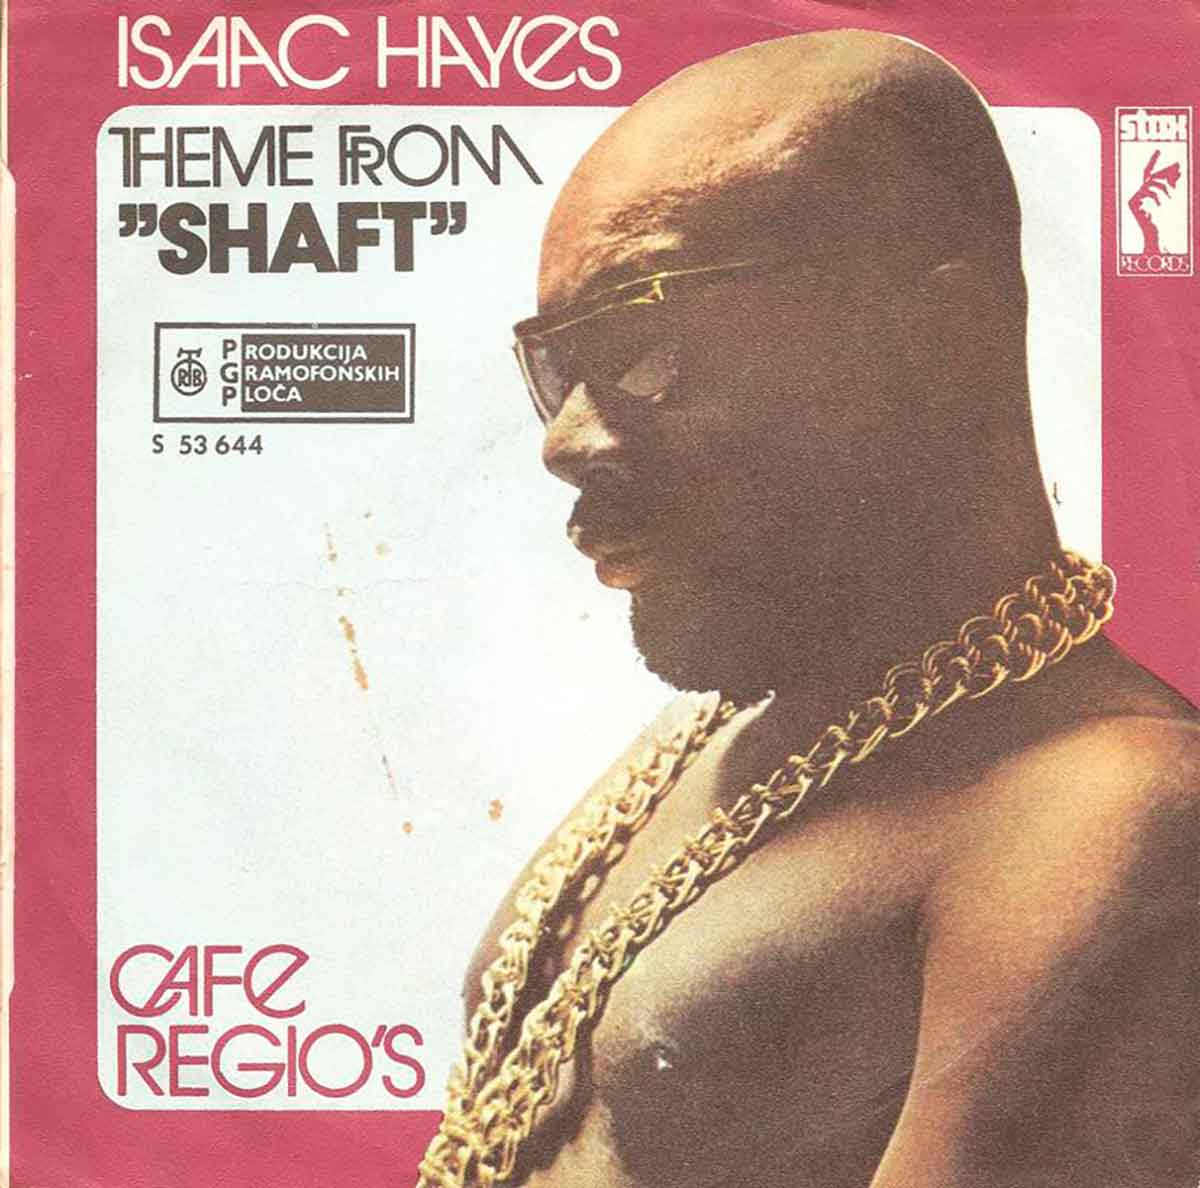 Isaac Hayes theme from shaft